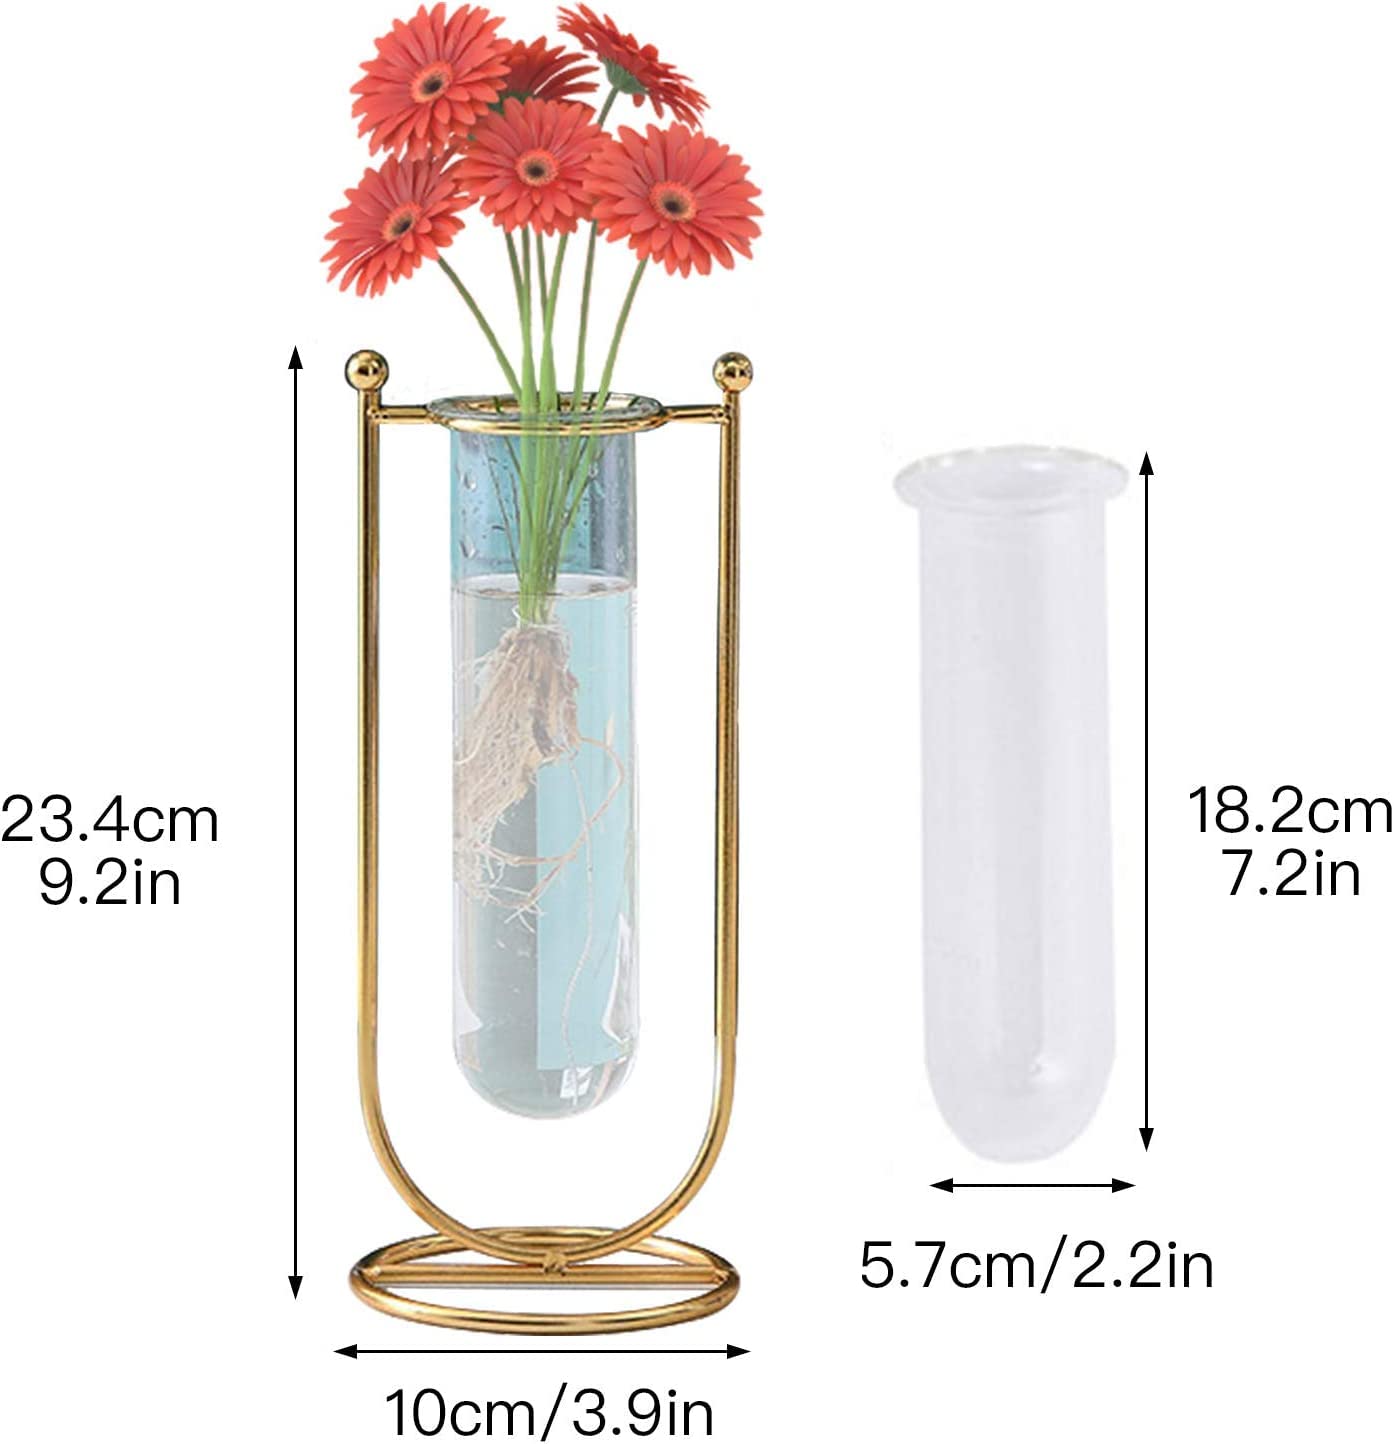 Desktop Glass Planter Hydroponics Vase Glass Propagation Station with Modern Creative Geometric Metal Frame Test Tube Vase for Home Office Decor Table Top (Set of 2)